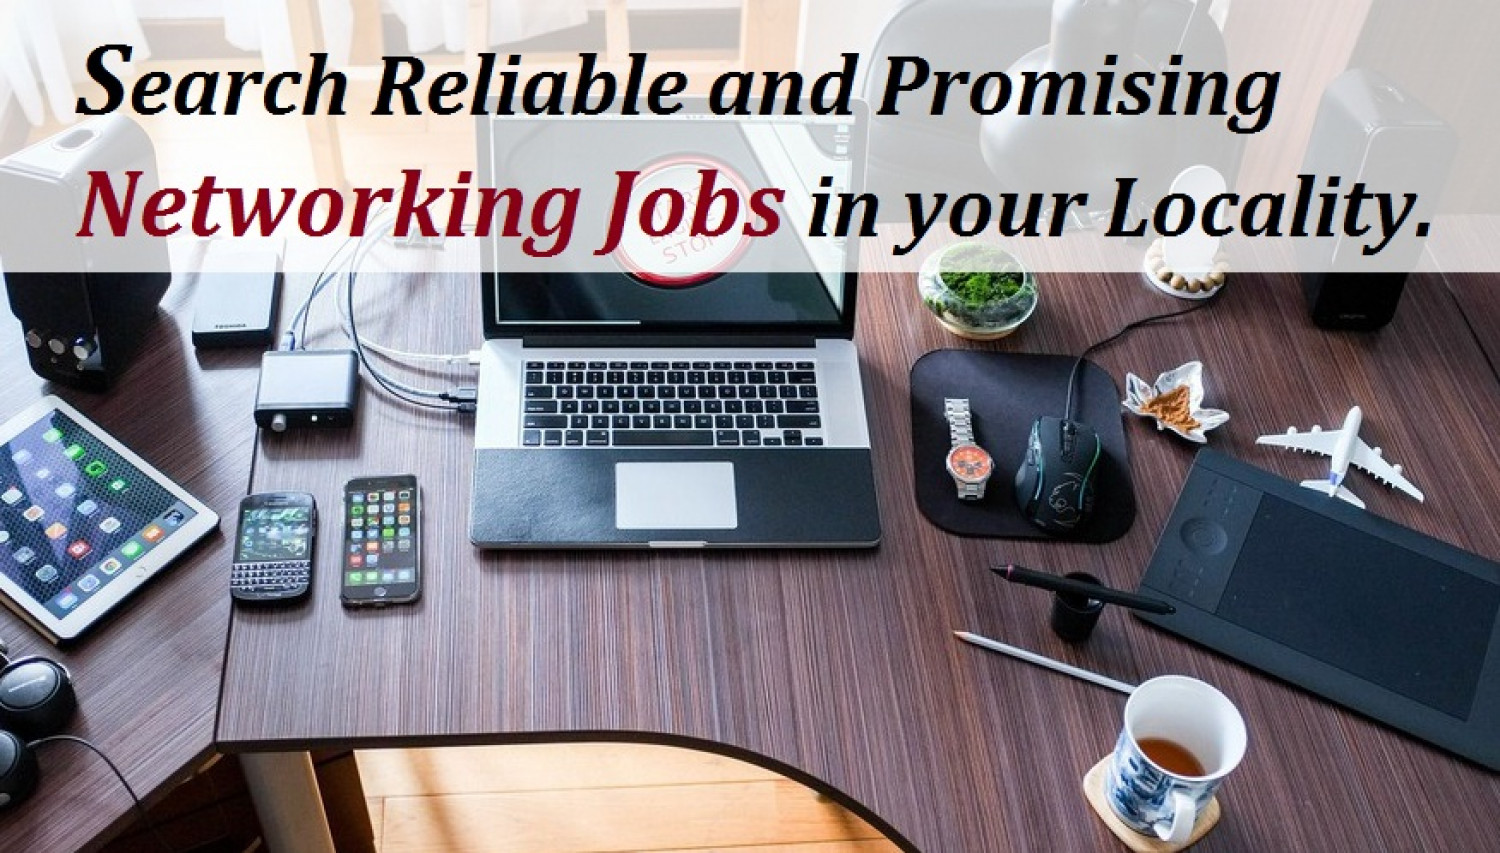 Search Reliable and Promising Networking Jobs in your Locality. Infographic